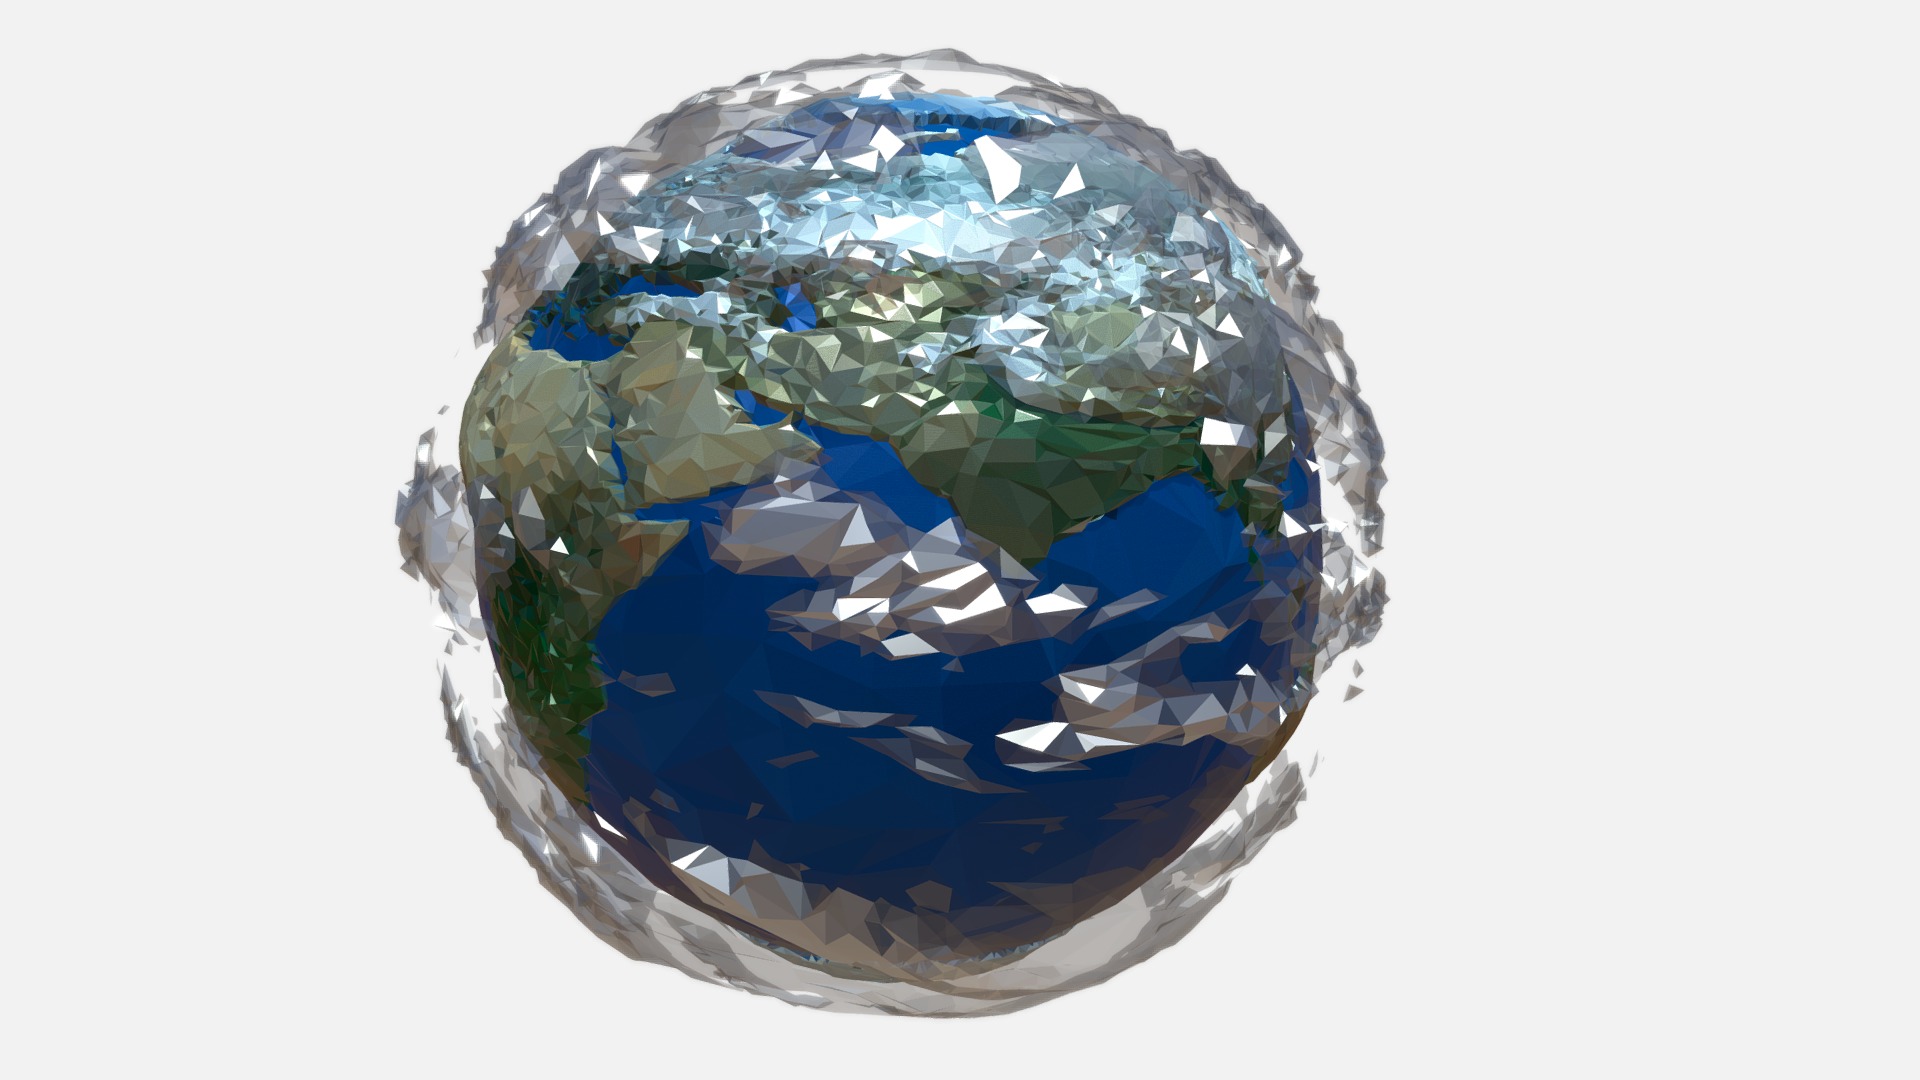 3D model Low Polygon Art Planet Earth - This is a 3D model of the Low Polygon Art Planet Earth. The 3D model is about a blue and white rock.